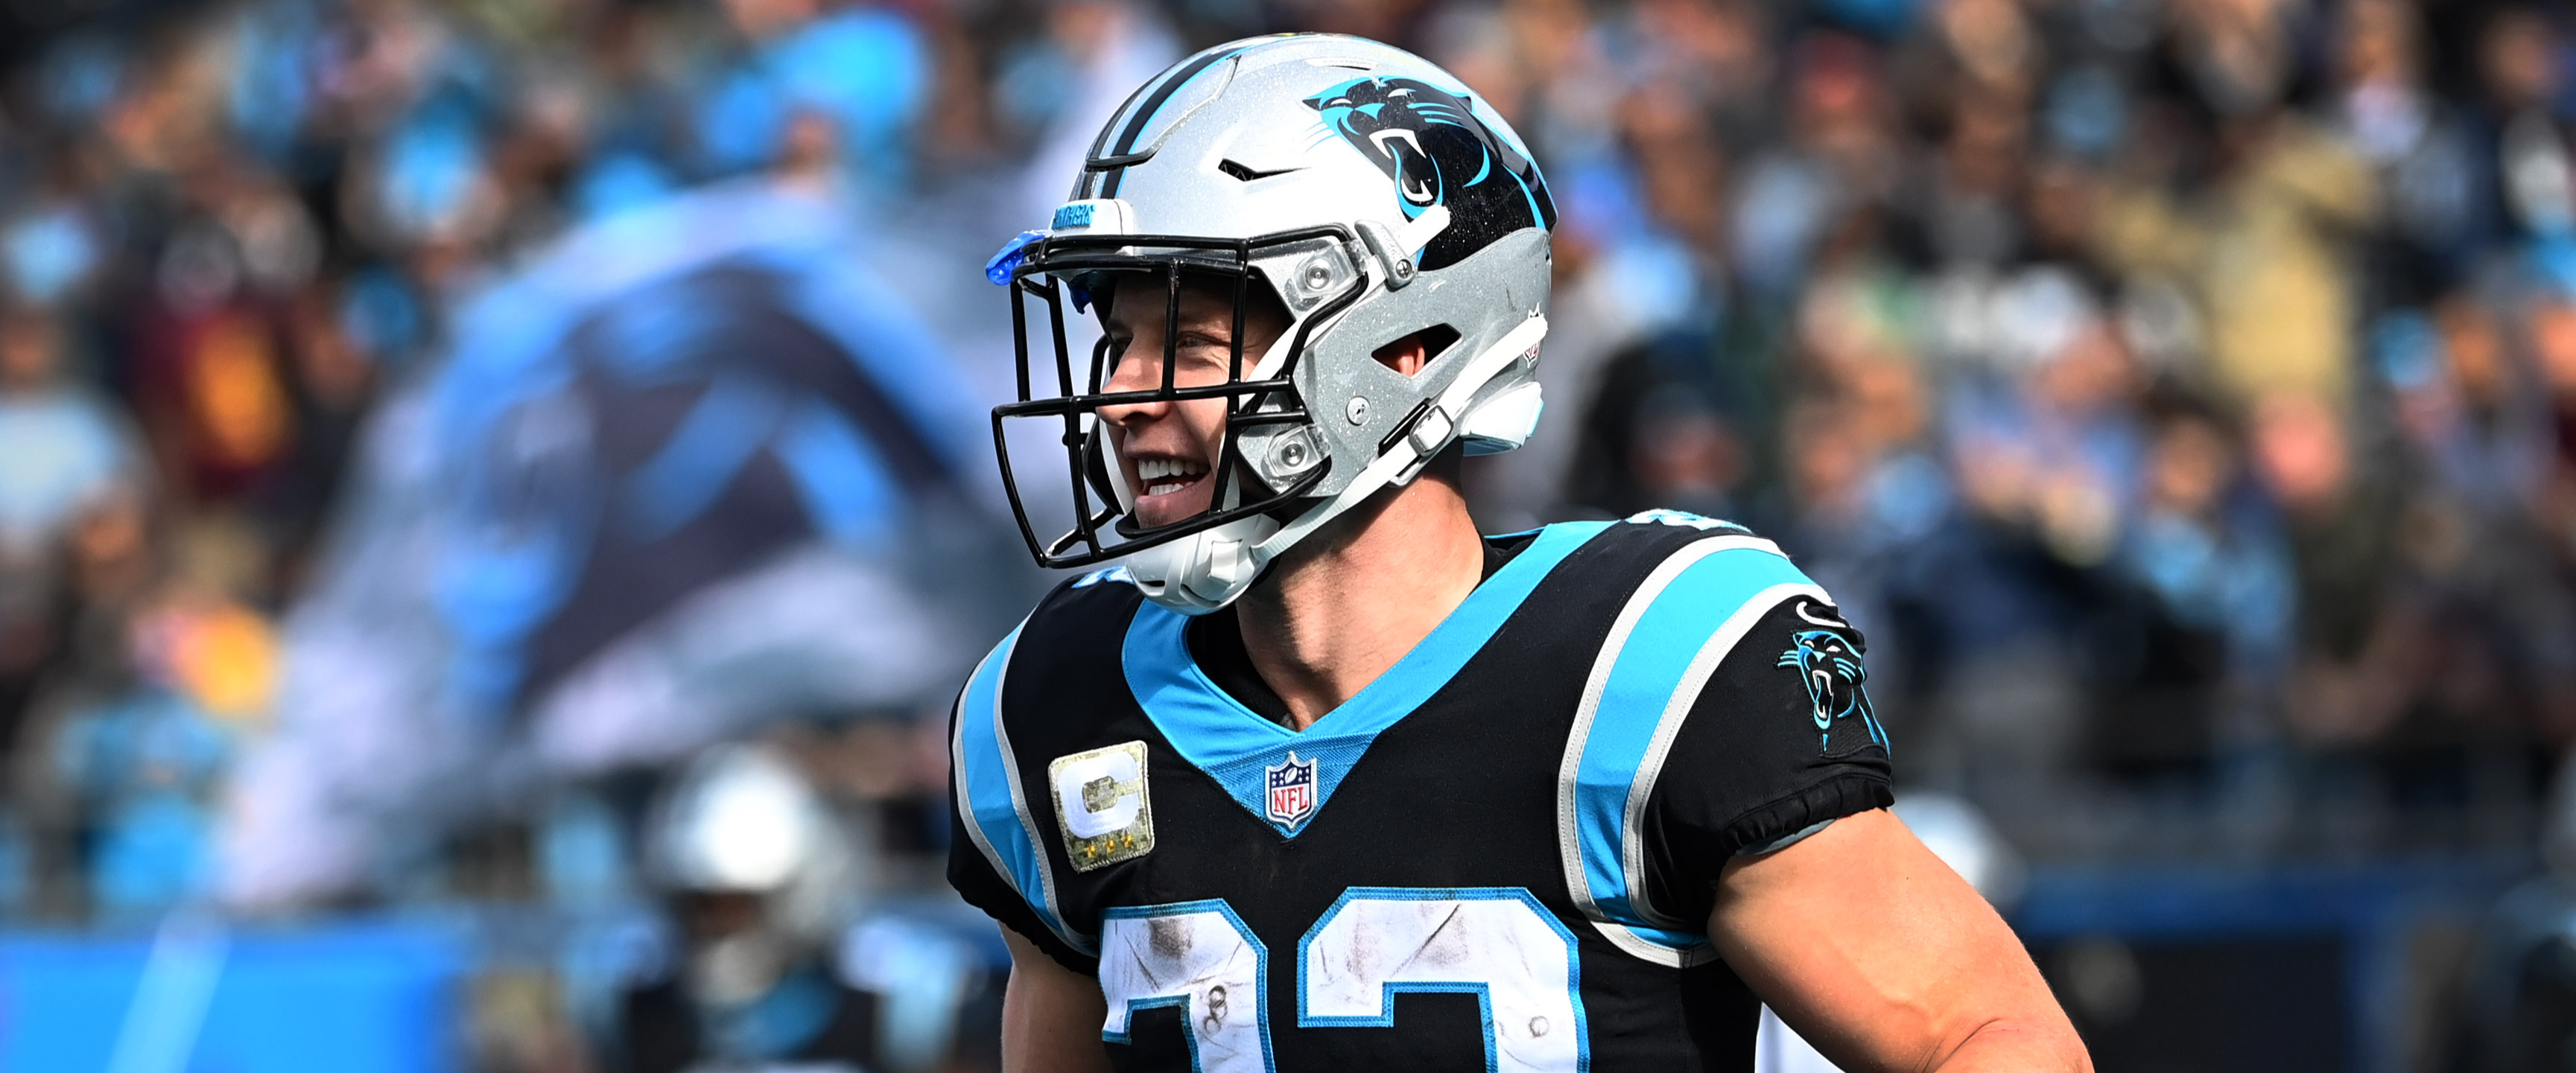 I think Chrisitan McCaffrey is overrated. Here's why